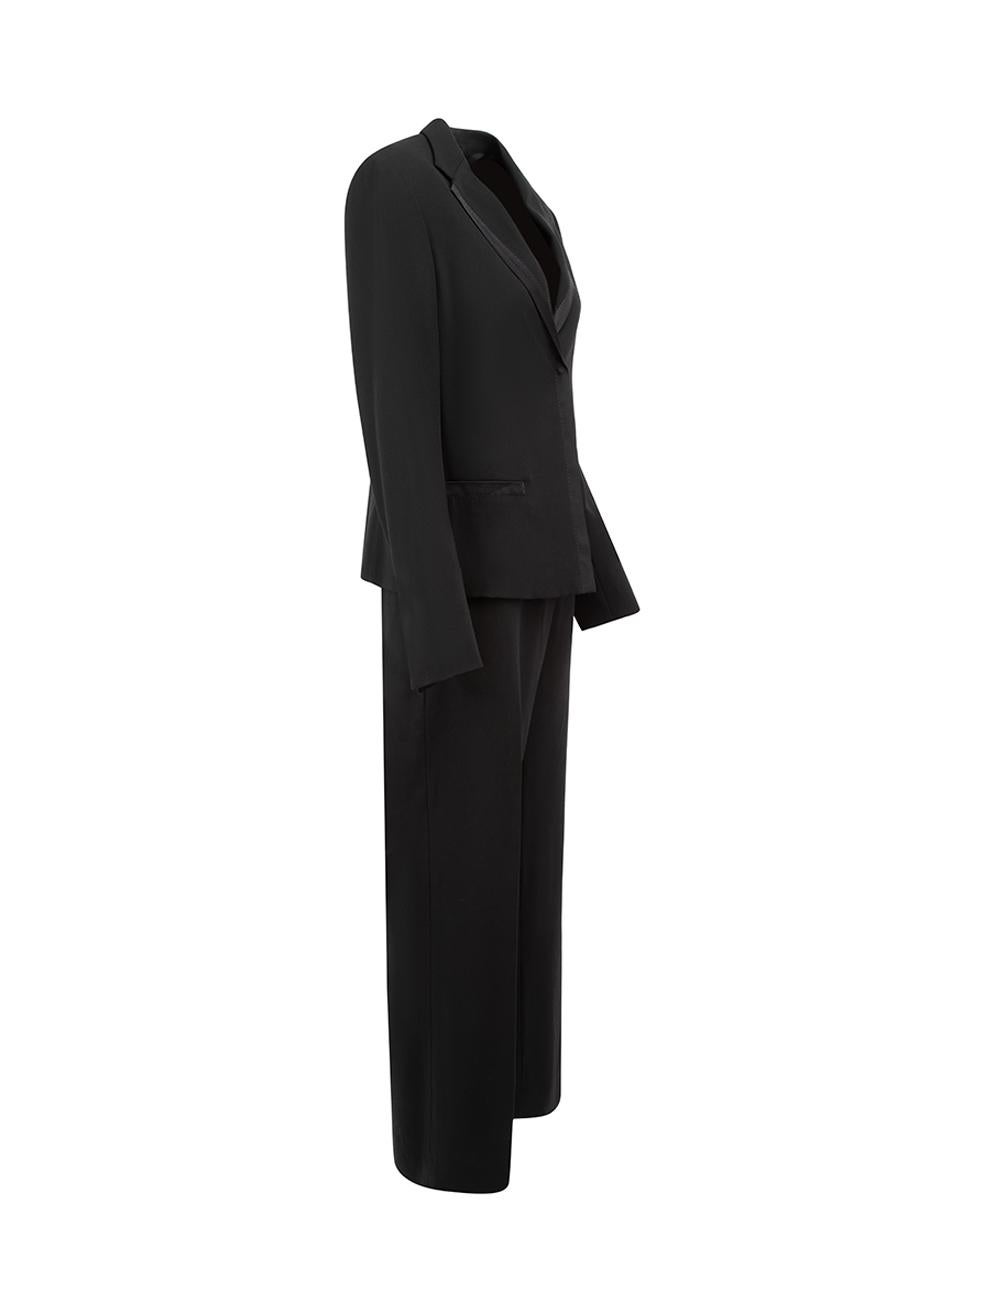 CONDITION is Never Worn. No visible wear to set is evident on this used Max Mara designer resale item.



Details


Black

Wool

Blazer and trousers set

Long sleeved blazed

Snap button fastening

Satin trim

2x Front pockets

Wide leg trousers

2x